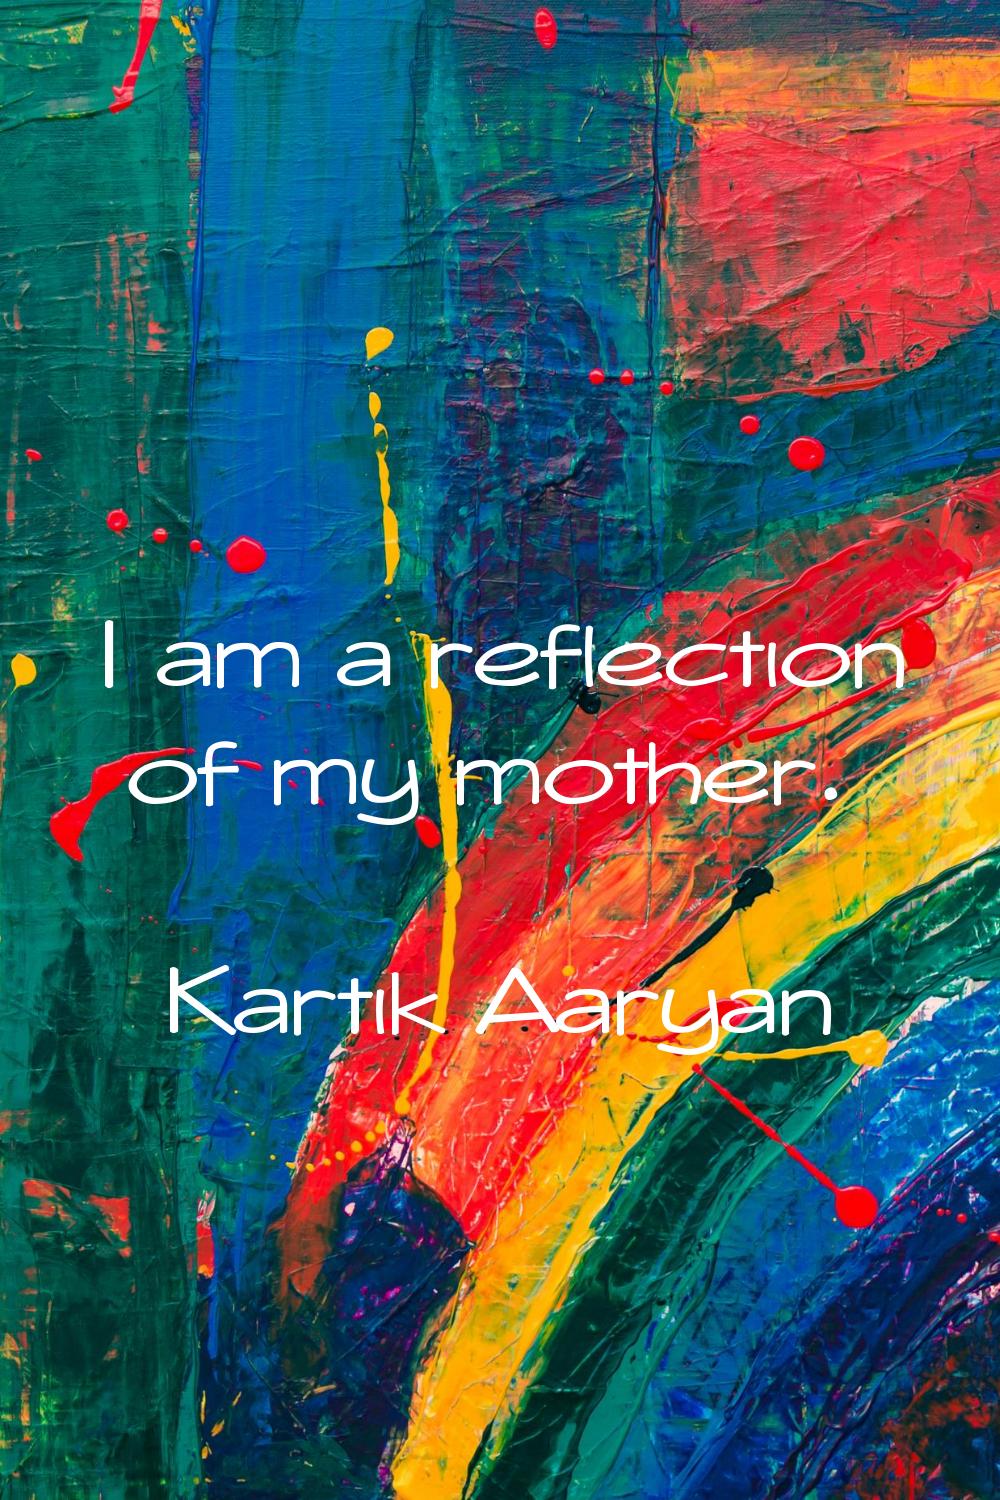 I am a reflection of my mother.